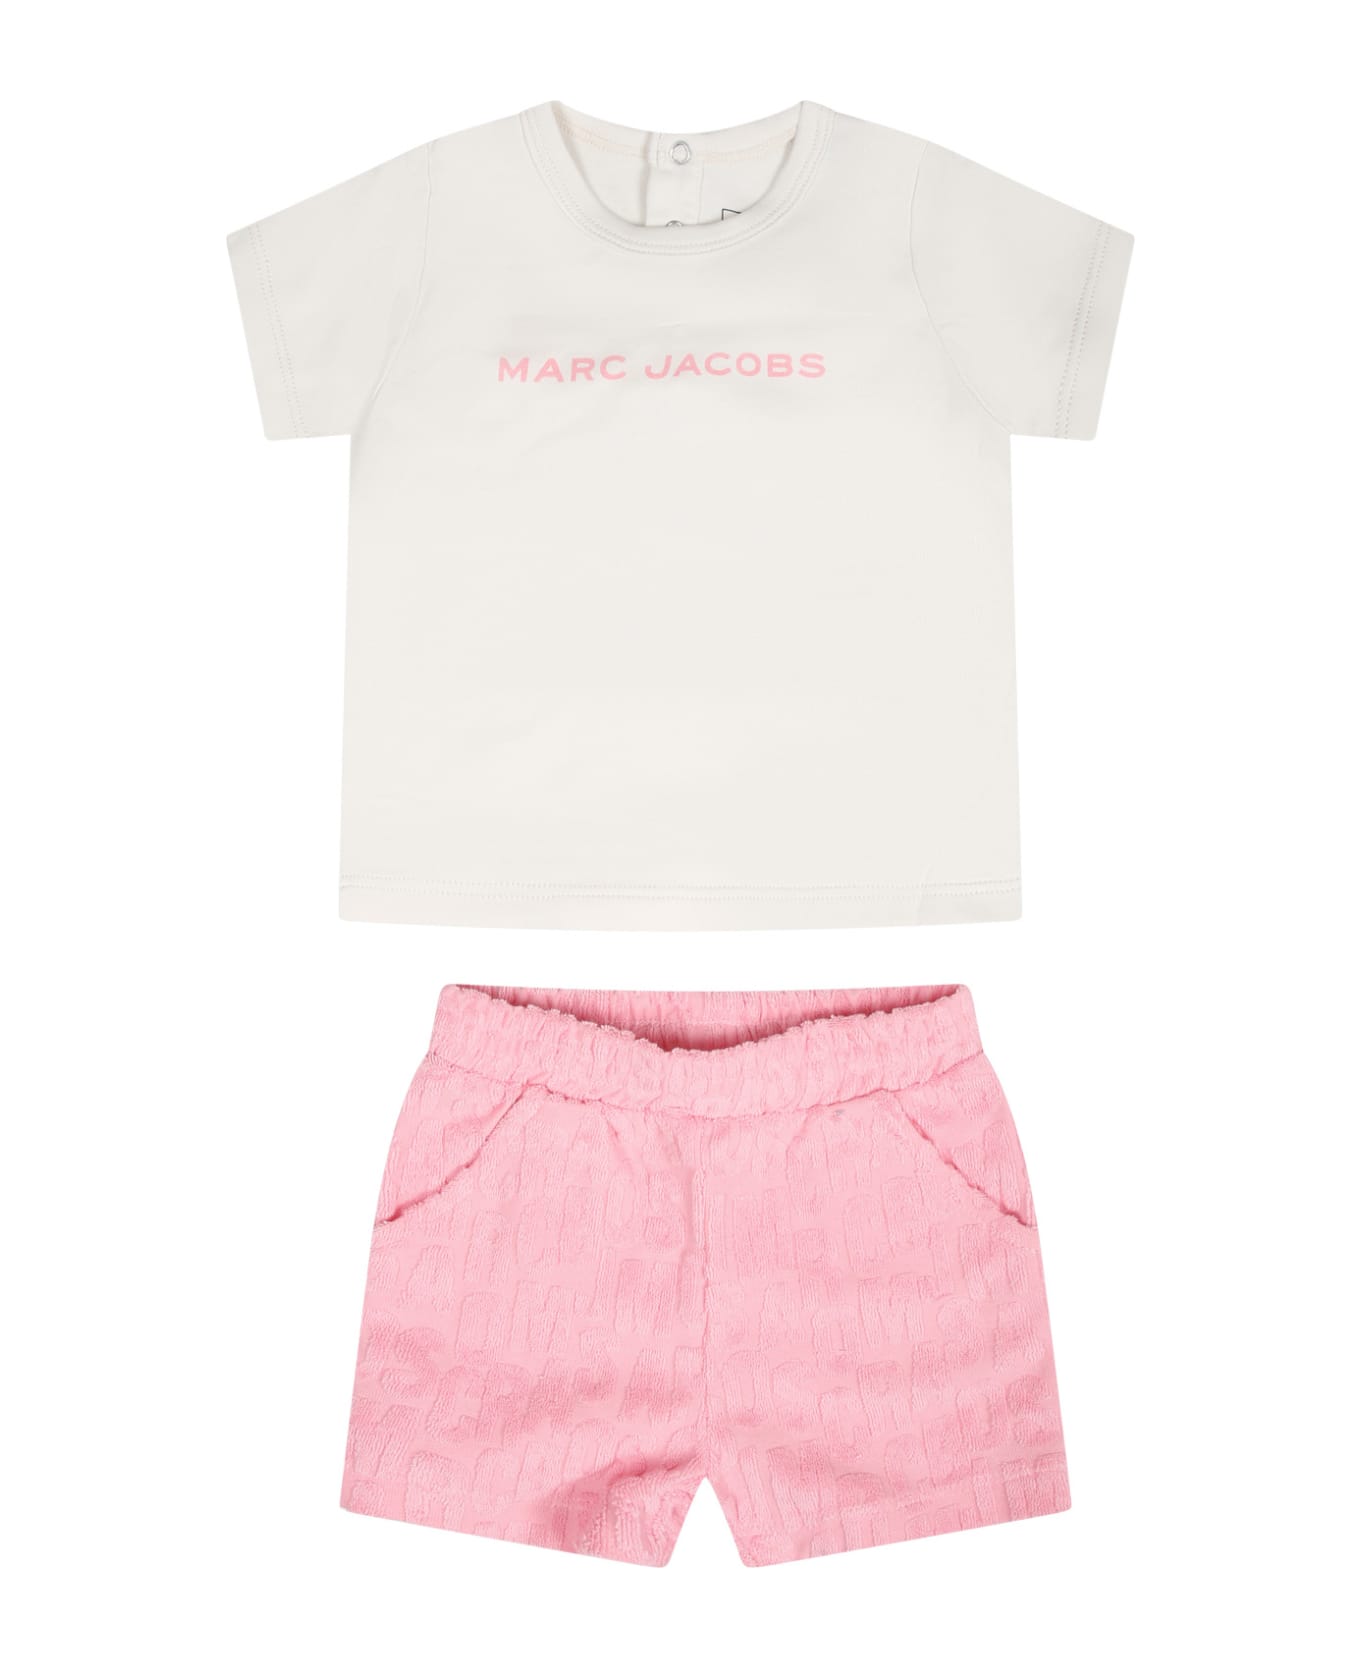 Marc Jacobs Pink Set For Baby Girl With Logo - Pink ボトムス